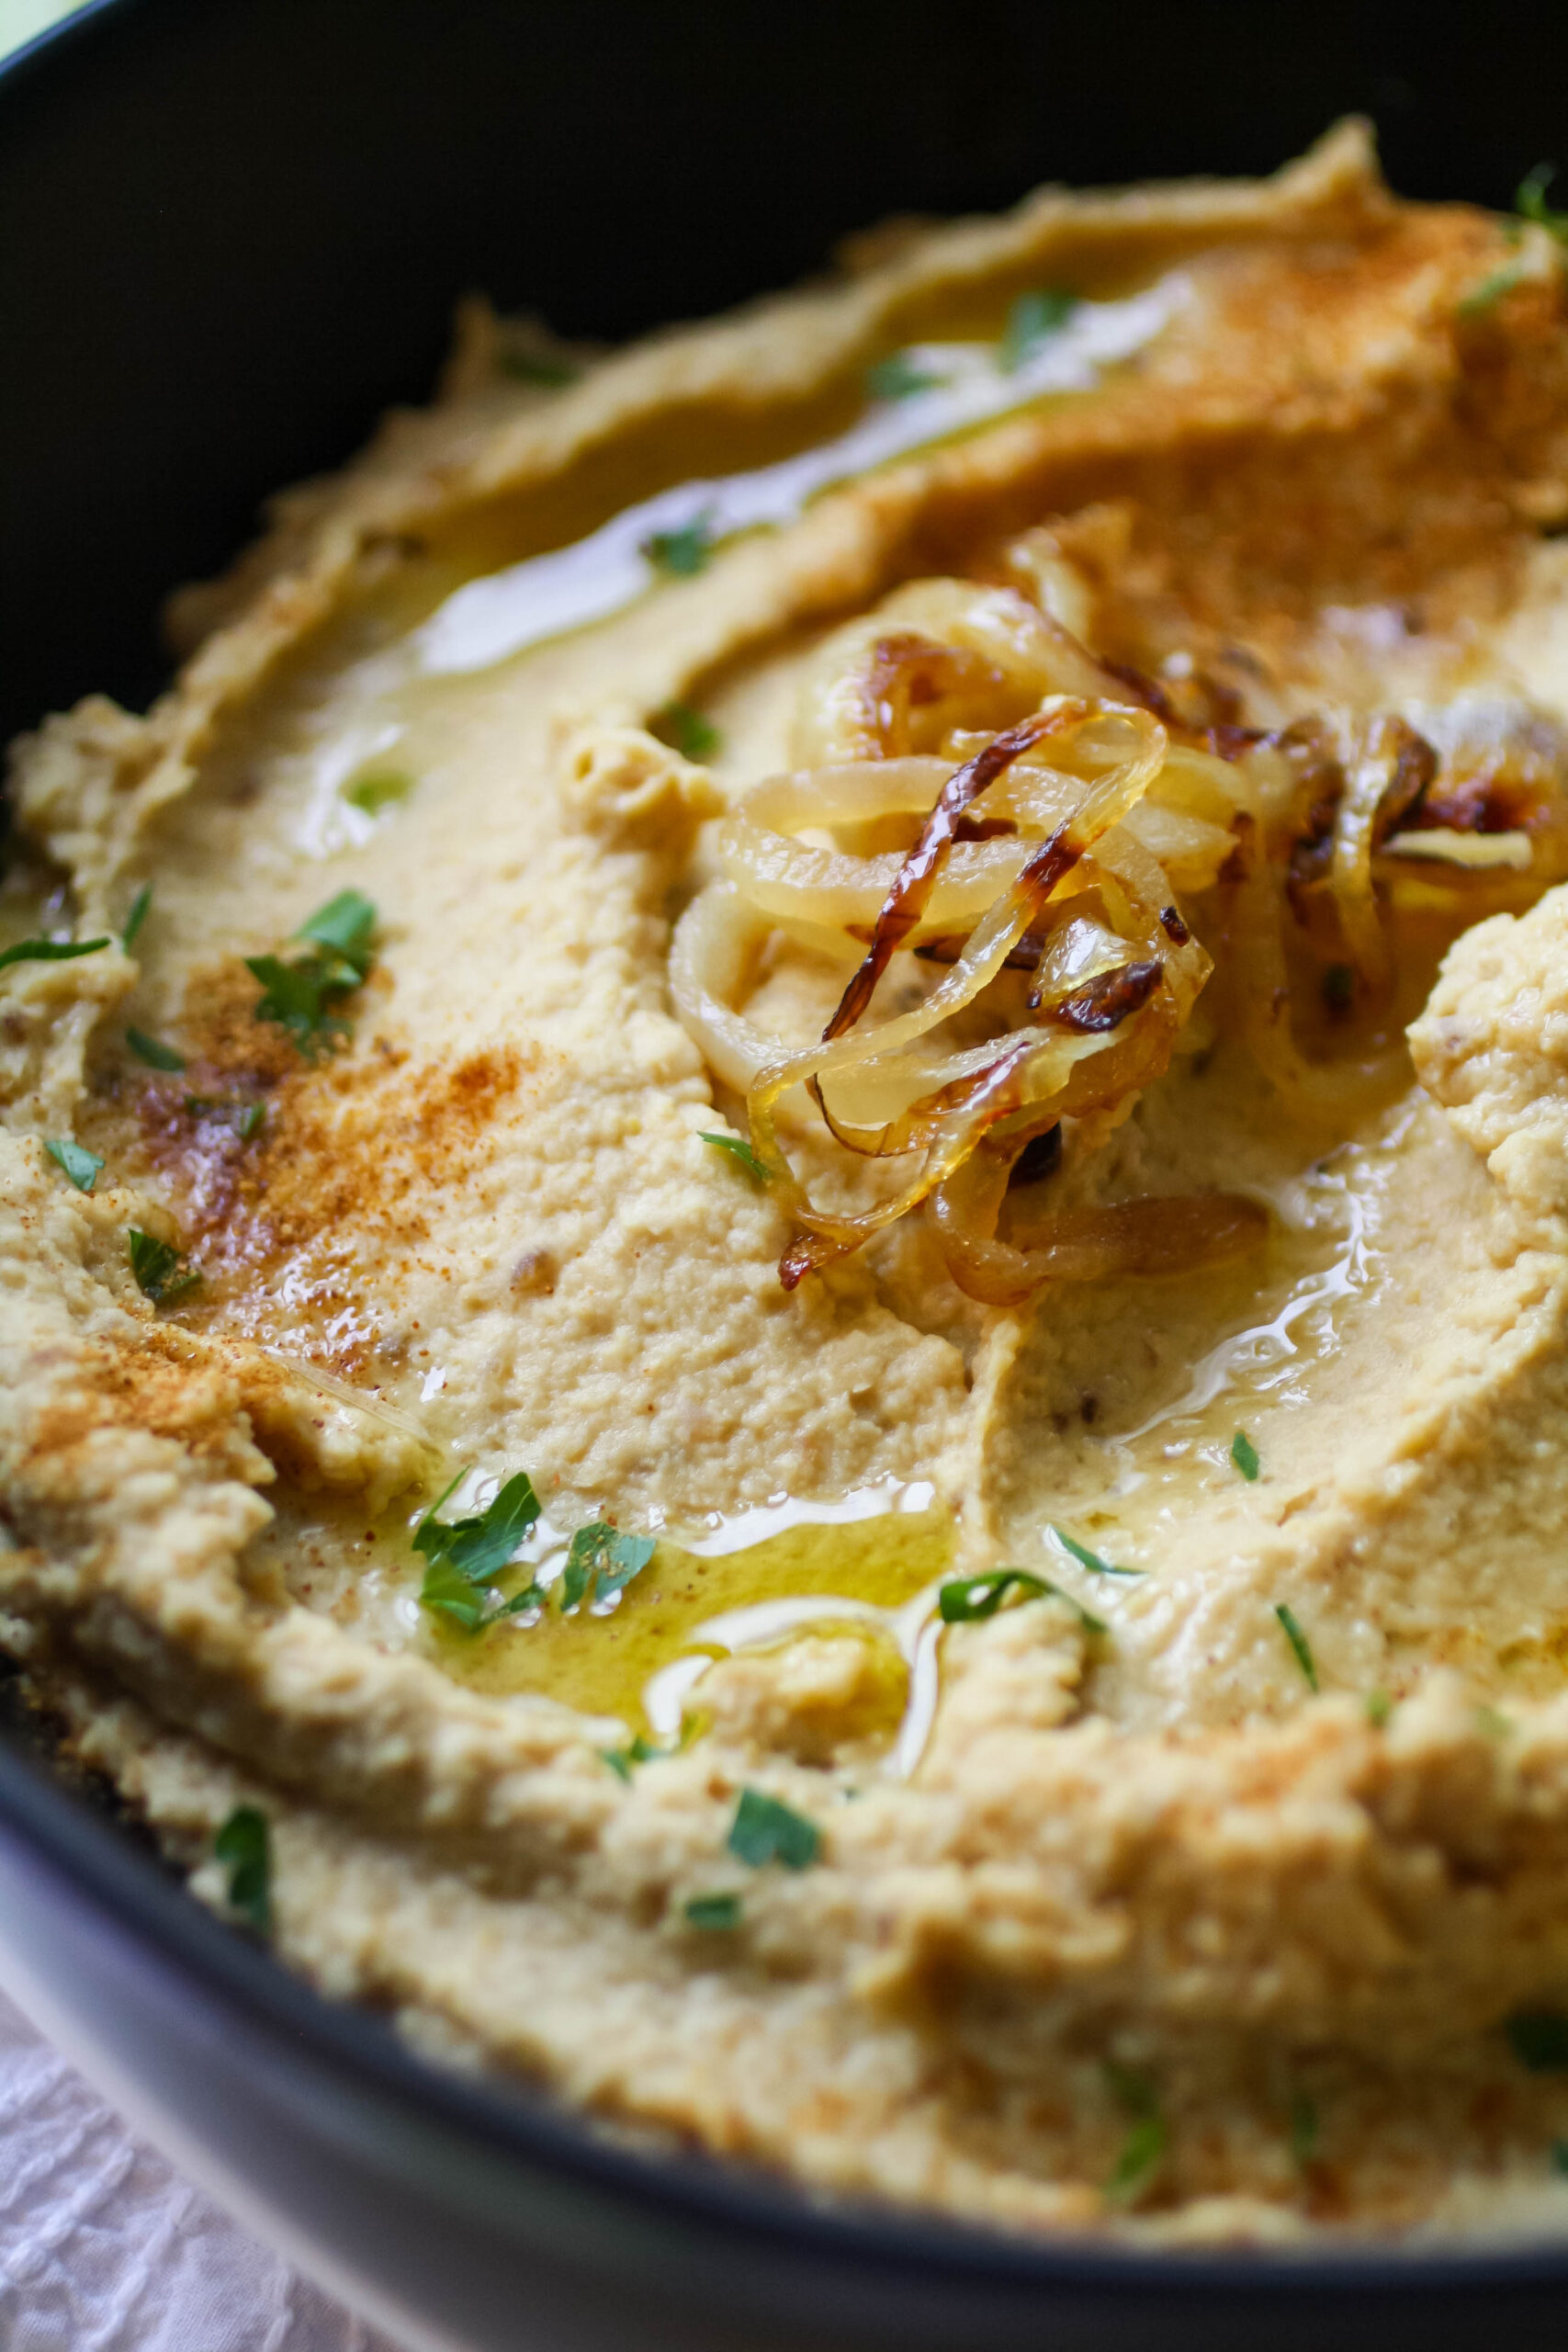 A bowl of caramelized onion hummus is a wonderful snack.